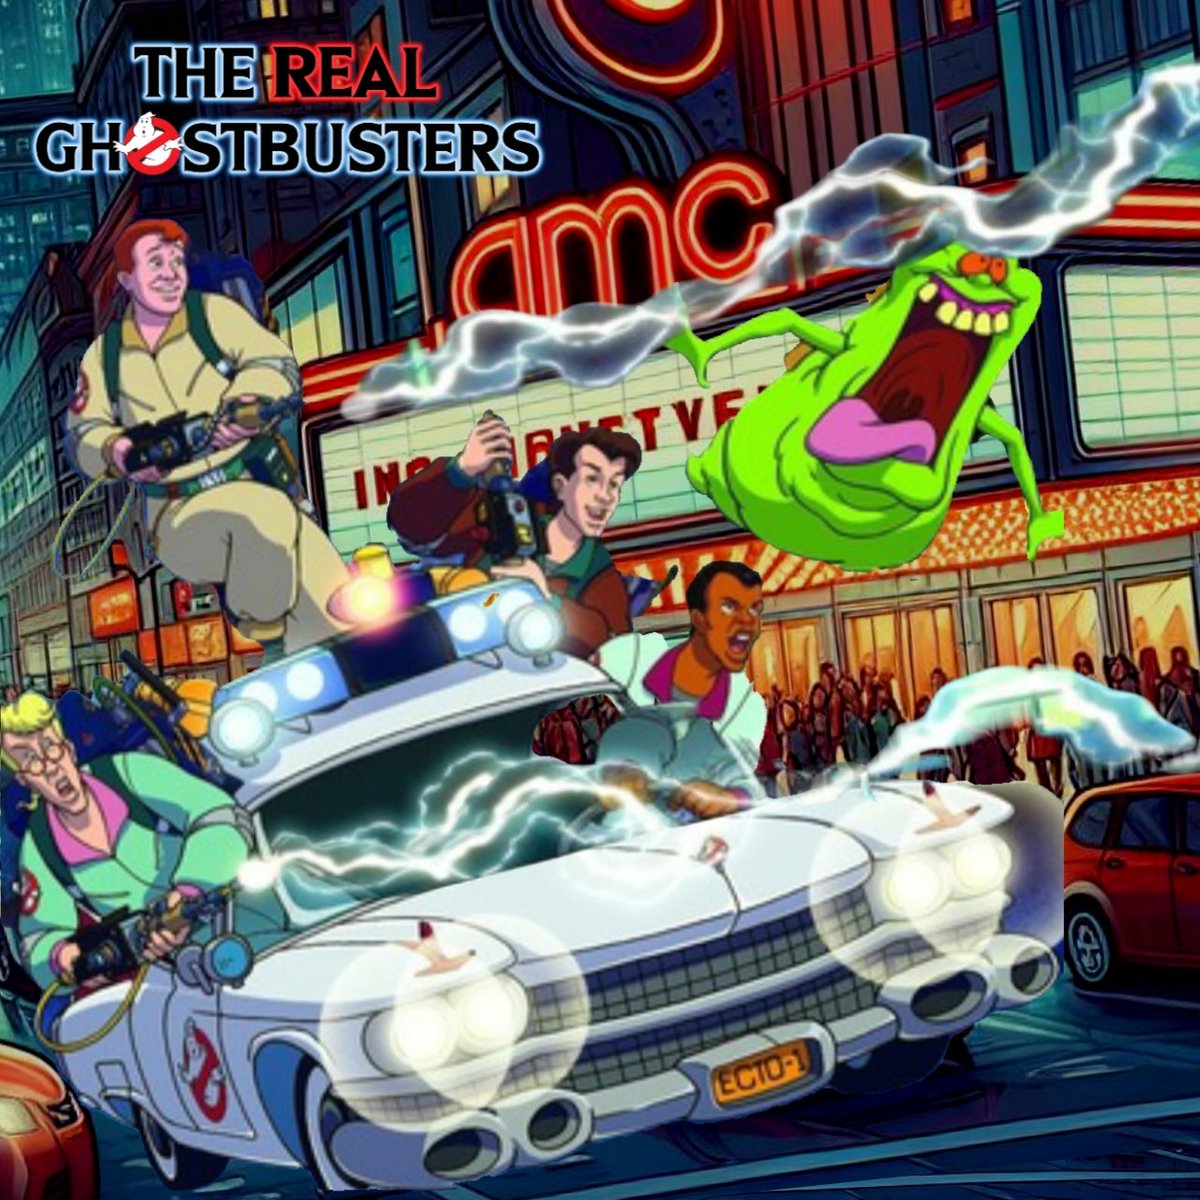 #GhostbustersFrozenEmpire is coming to #AMCTheatres March 22nd!  IYKYK.  🥶👻
#AMCNOTLEAVING 🍿🎬
#TheRealGhostBusters